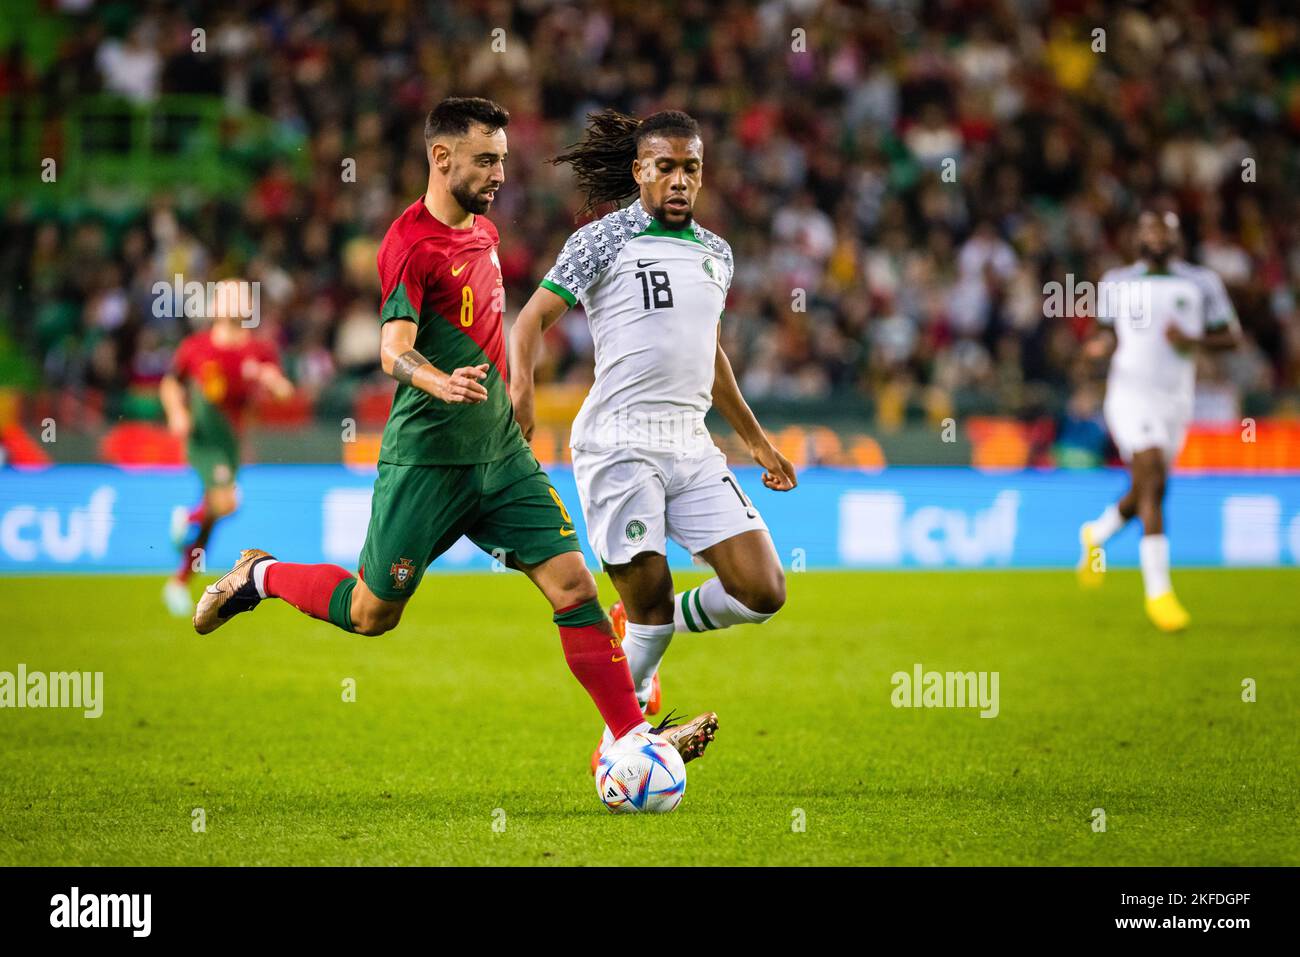 Lisbon, Portugal. 17th Nov, 2022. Bruno Fernandes of Portugal (L) and Alex Iwobi of Nigeria (R) seen in action during the friendly football match between Portugal and Nigeria, at the Jose Alvalade stadium ahead of the Qatar 2022 World Cup. (Final score: Portugal 4 - 0 Nigeria) Credit: SOPA Images Limited/Alamy Live News Stock Photo